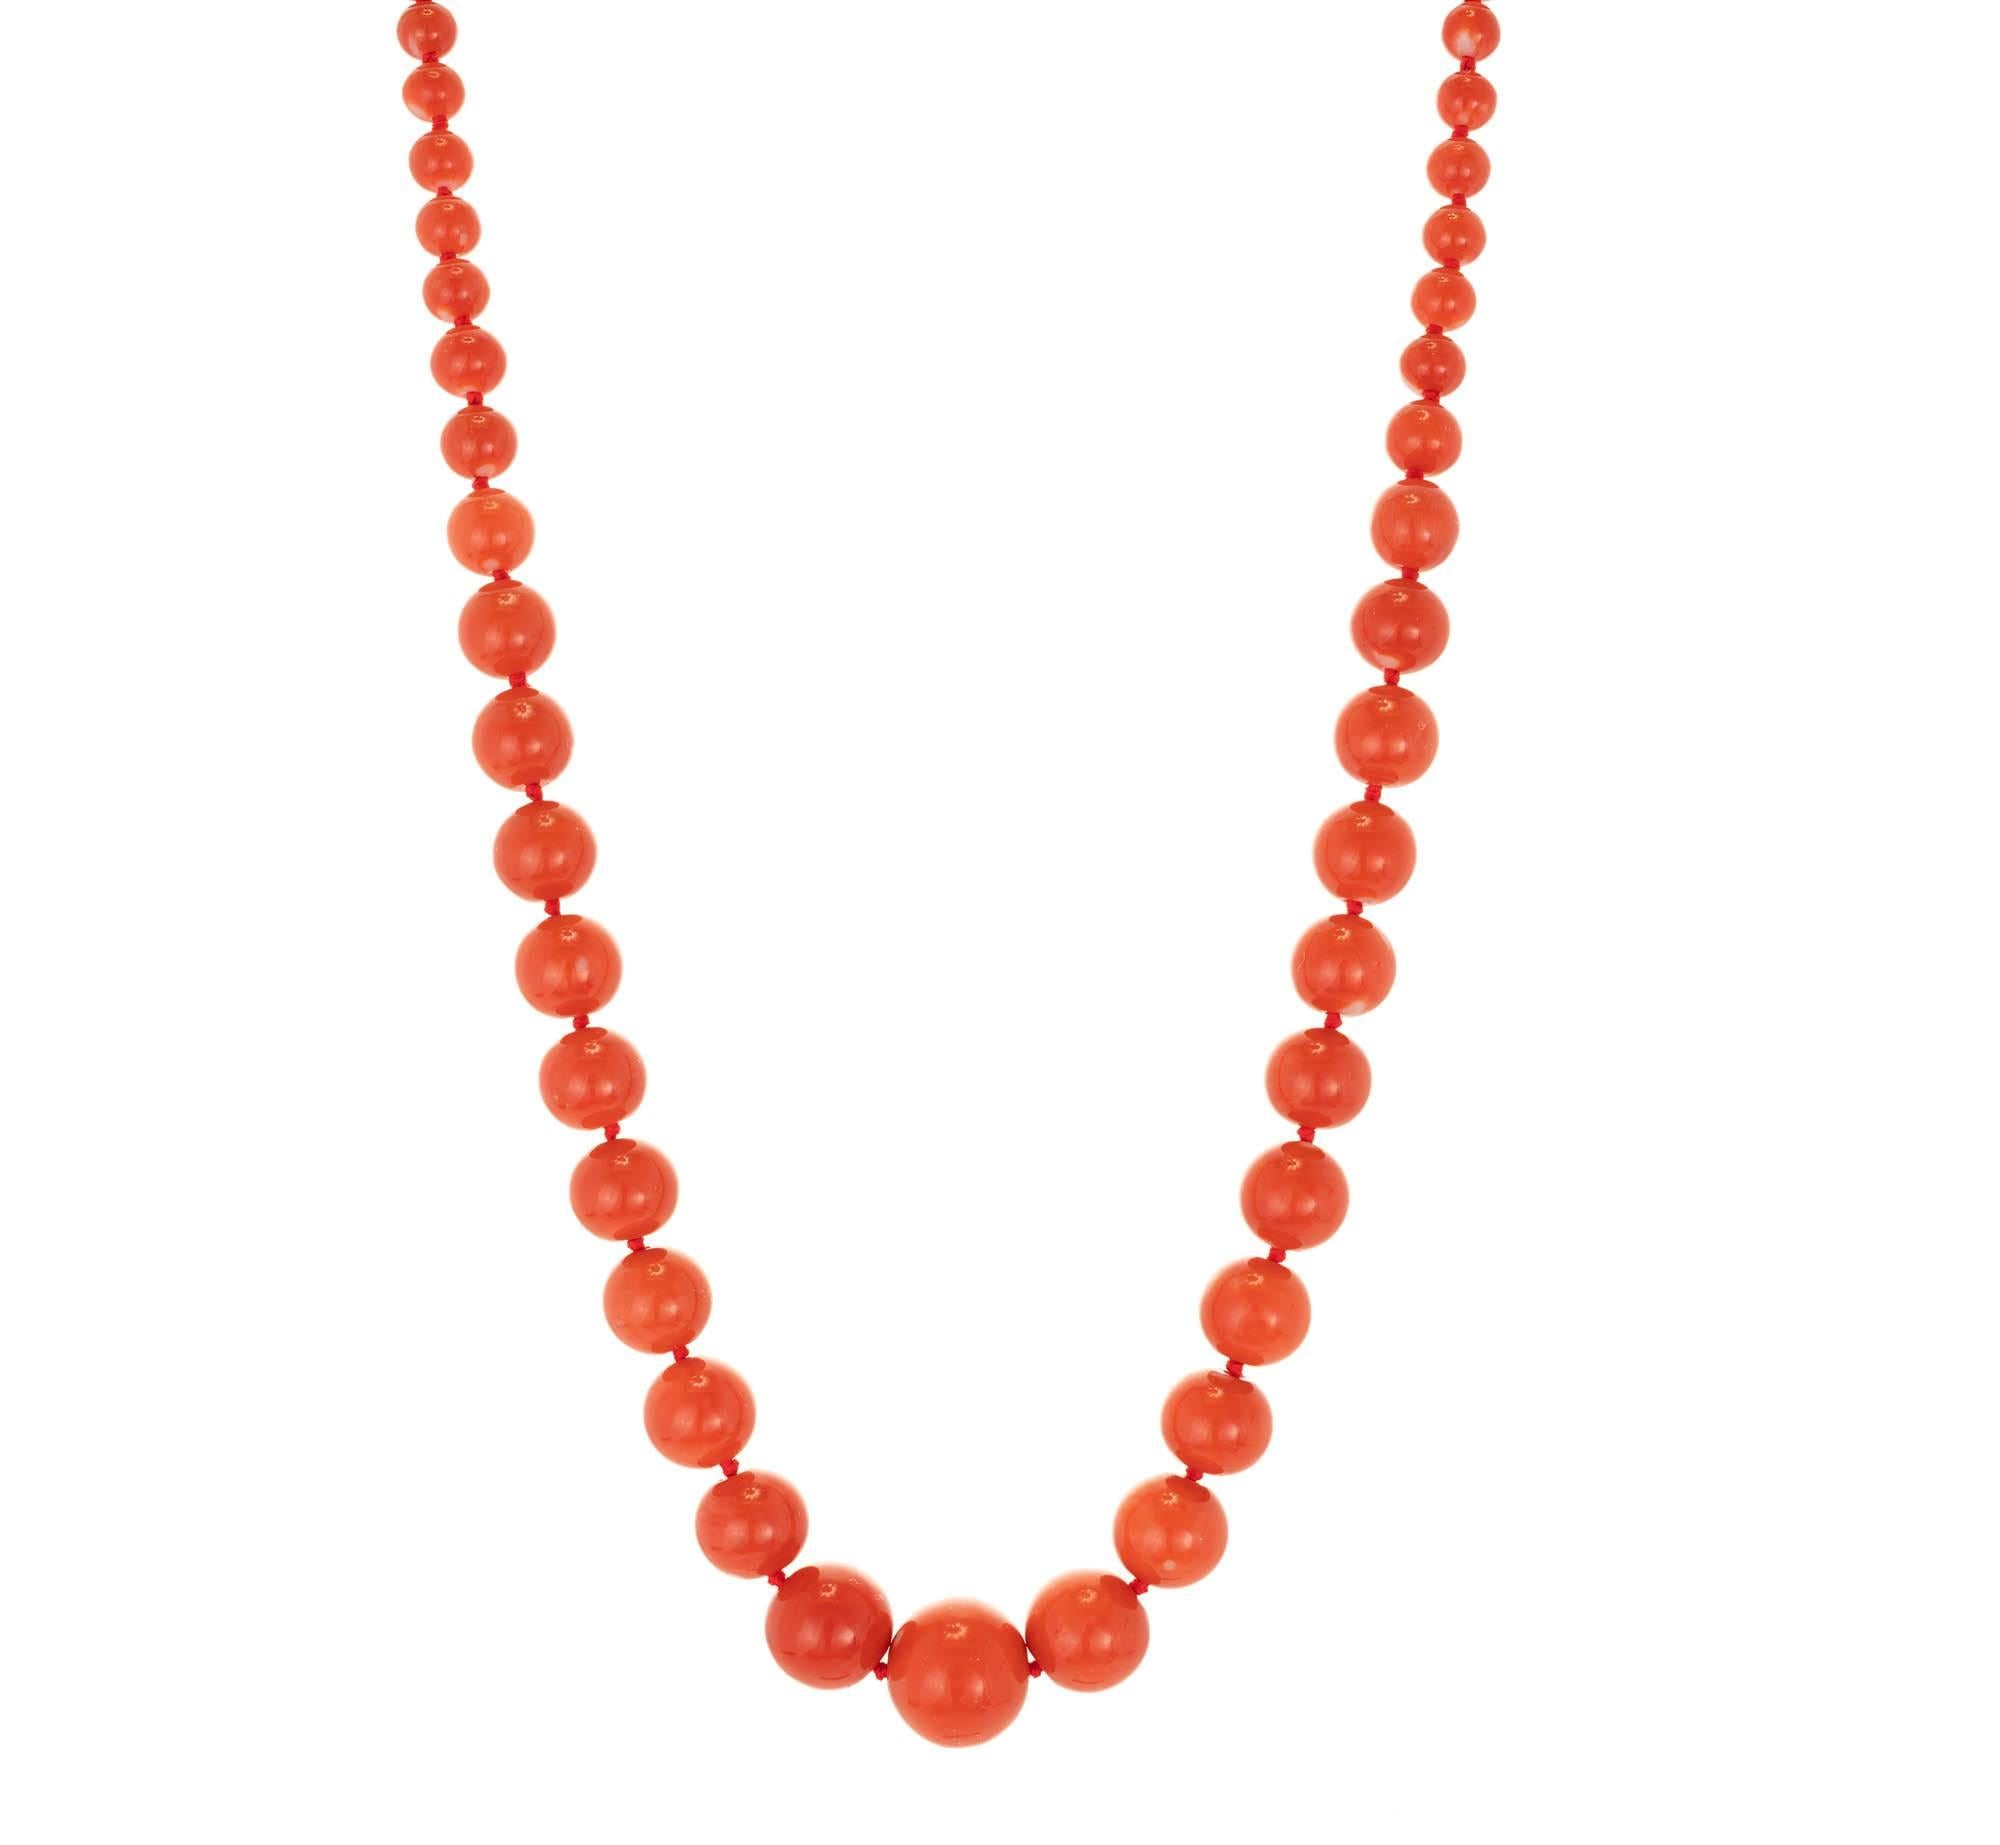 Single strand graduated natural coral necklace with a yellow gold diamond clasp. Composed of 57 reddish orange natural coral beads measuring from 15mm in diameter at front to 6mm in diameter at back. Secured by a buccelatti domed and oval shape